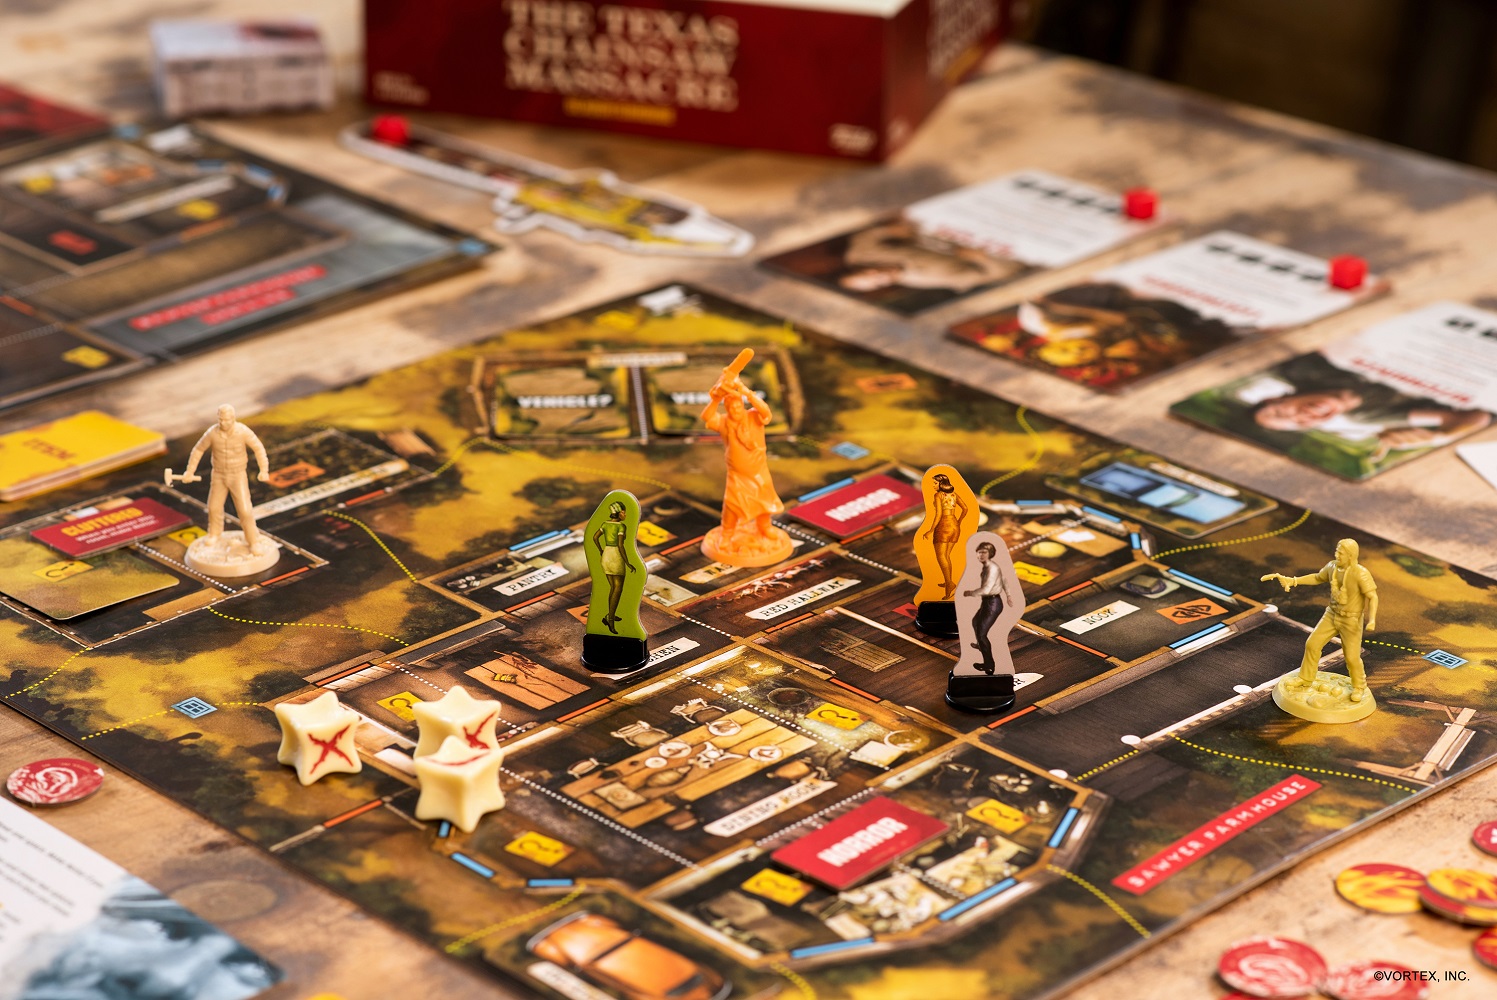 The Texas Chainsaw Massacre Board Game Review - One Board Family